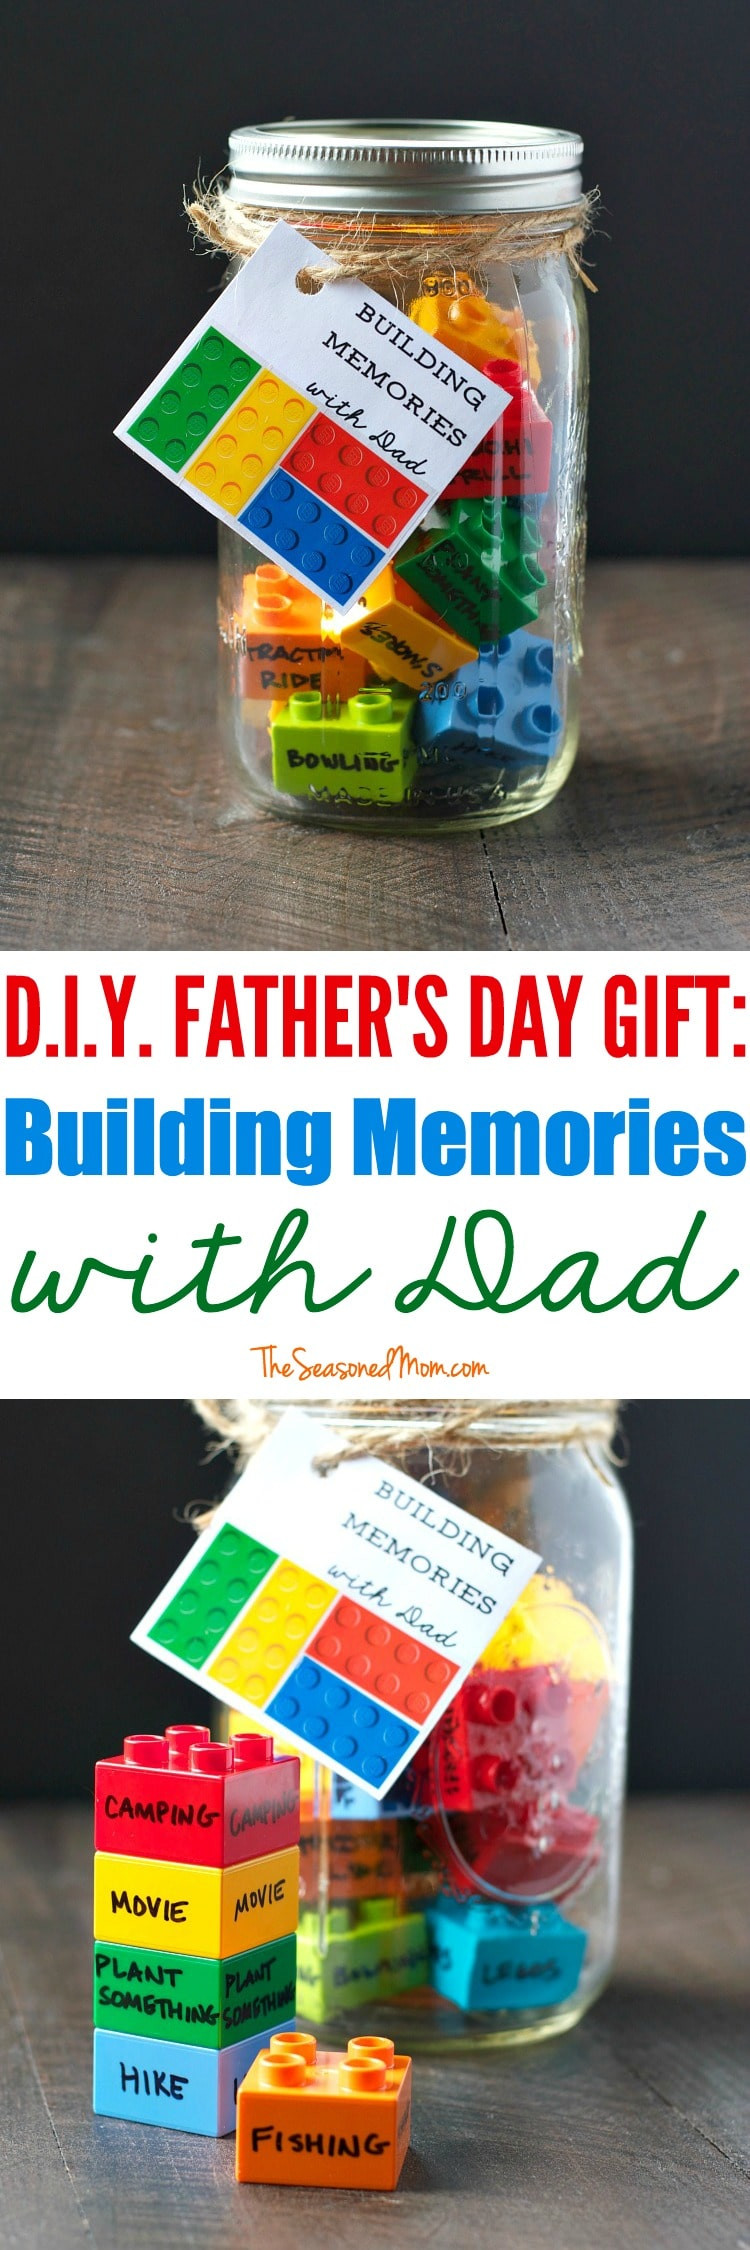 DIY Fathers Gifts
 25 Homemade Father s Day Gifts from Kids That Dad Can